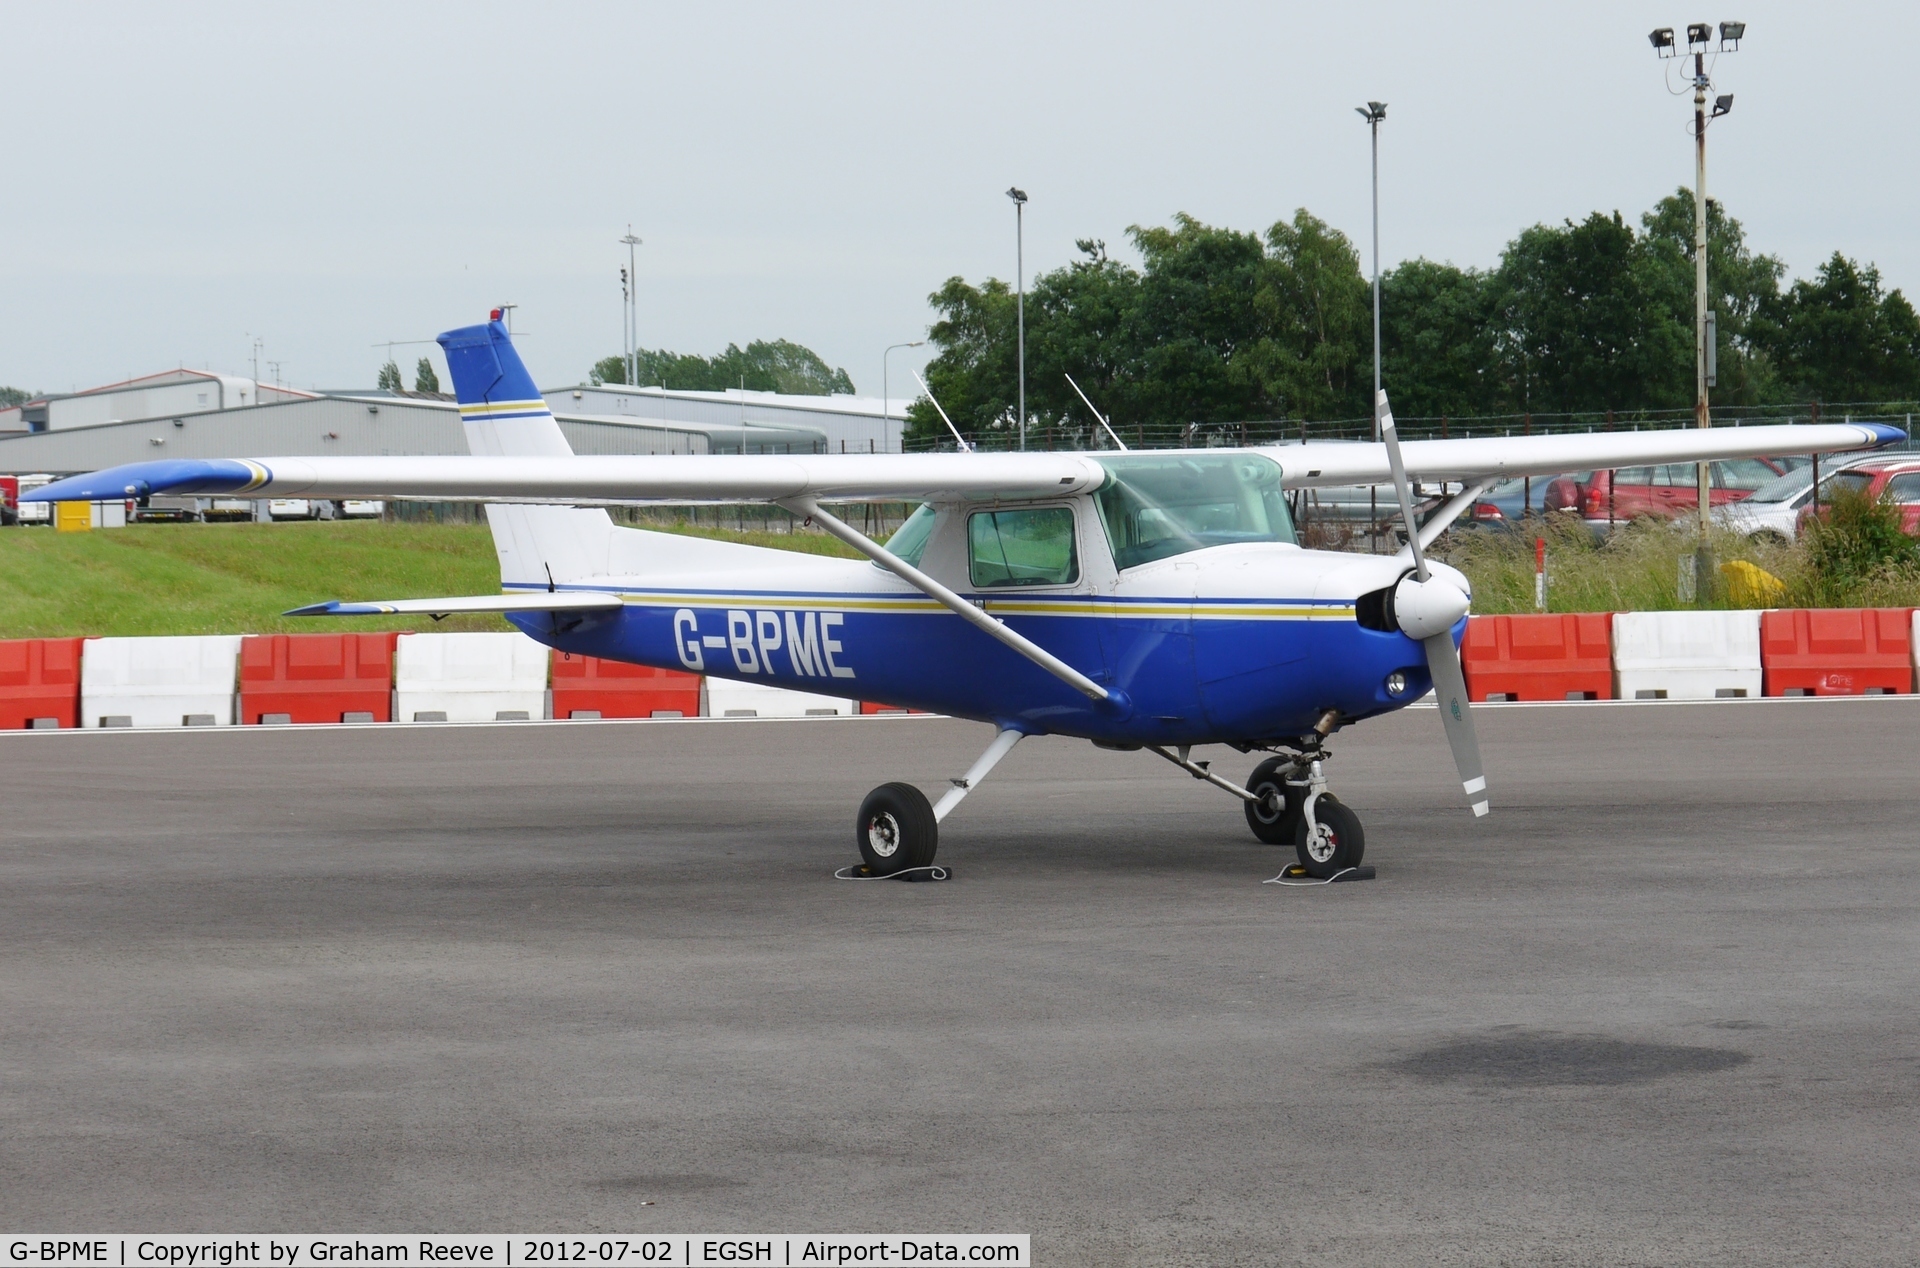 G-BPME, 1982 Cessna 152 C/N 152-85585, Parked at Norwich.